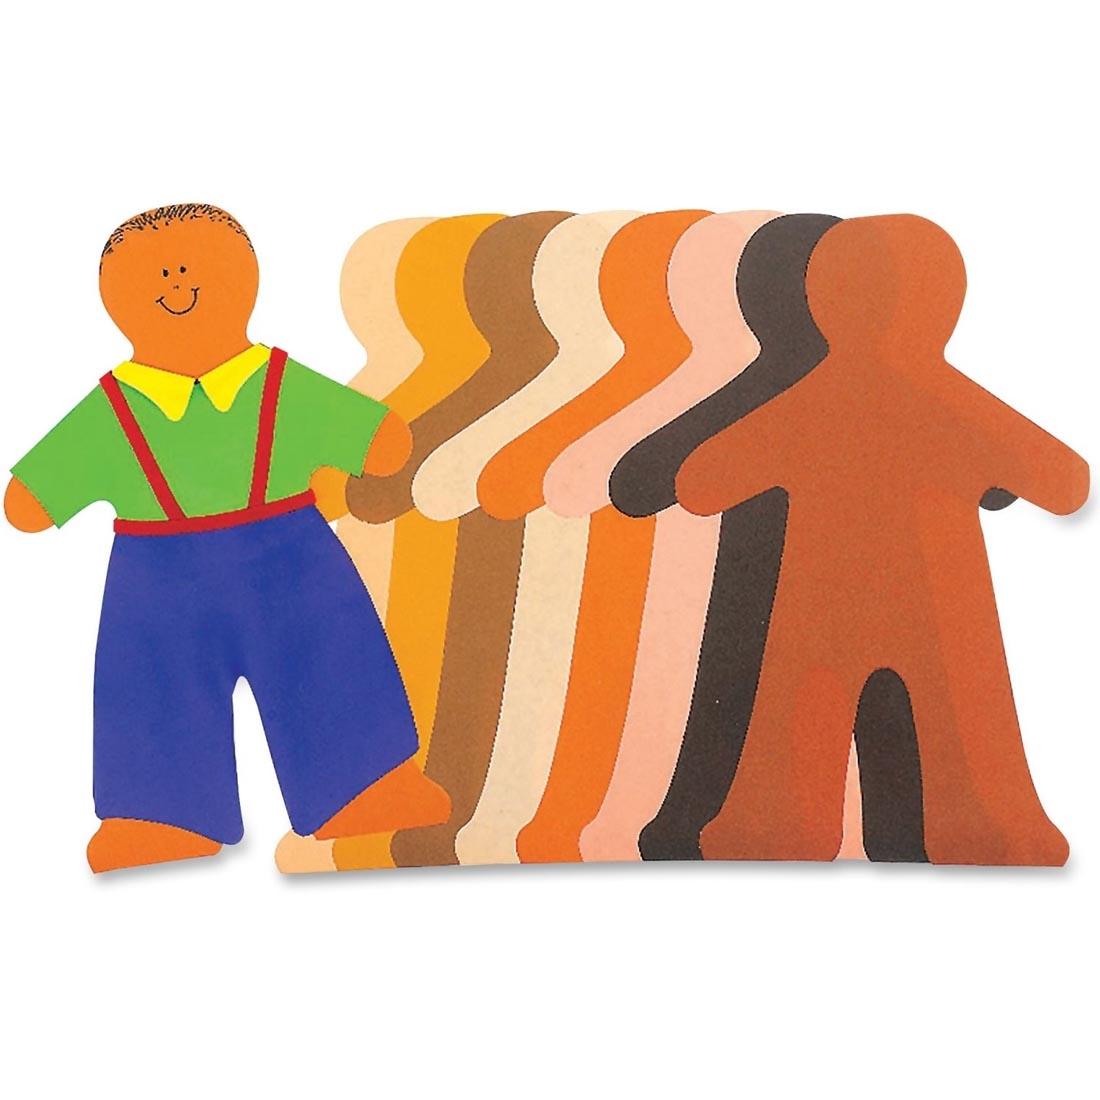 All eight colors of the Roylco Paper Doll Pad shown with one completed example